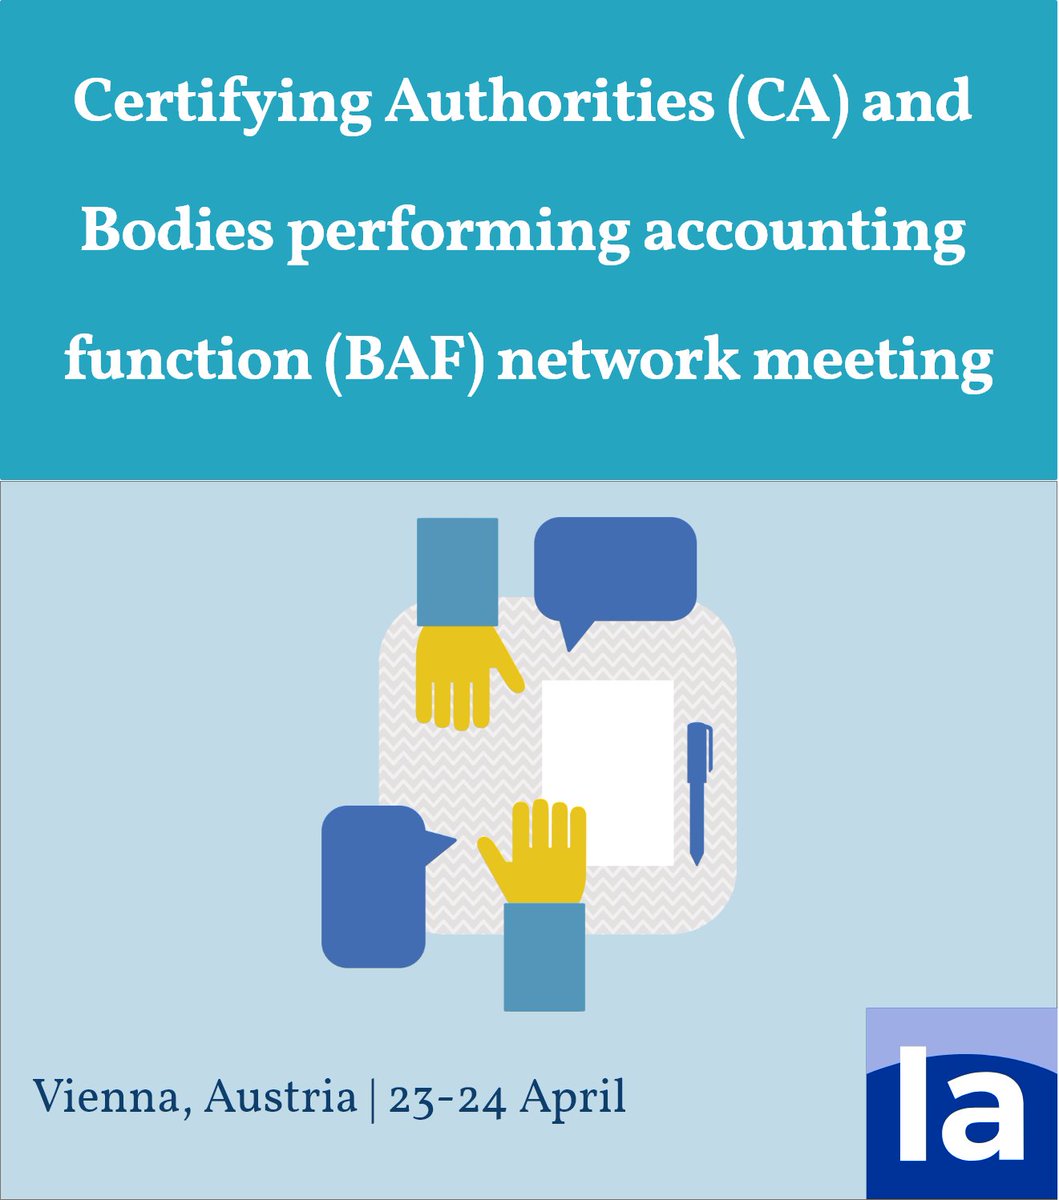 Join the Certifying Authorities (CA) and Bodies performing accounting function (BAF) network meeting on 23 and 24 April in Vienna, Austria. Find our more here: interact.eu/events/82